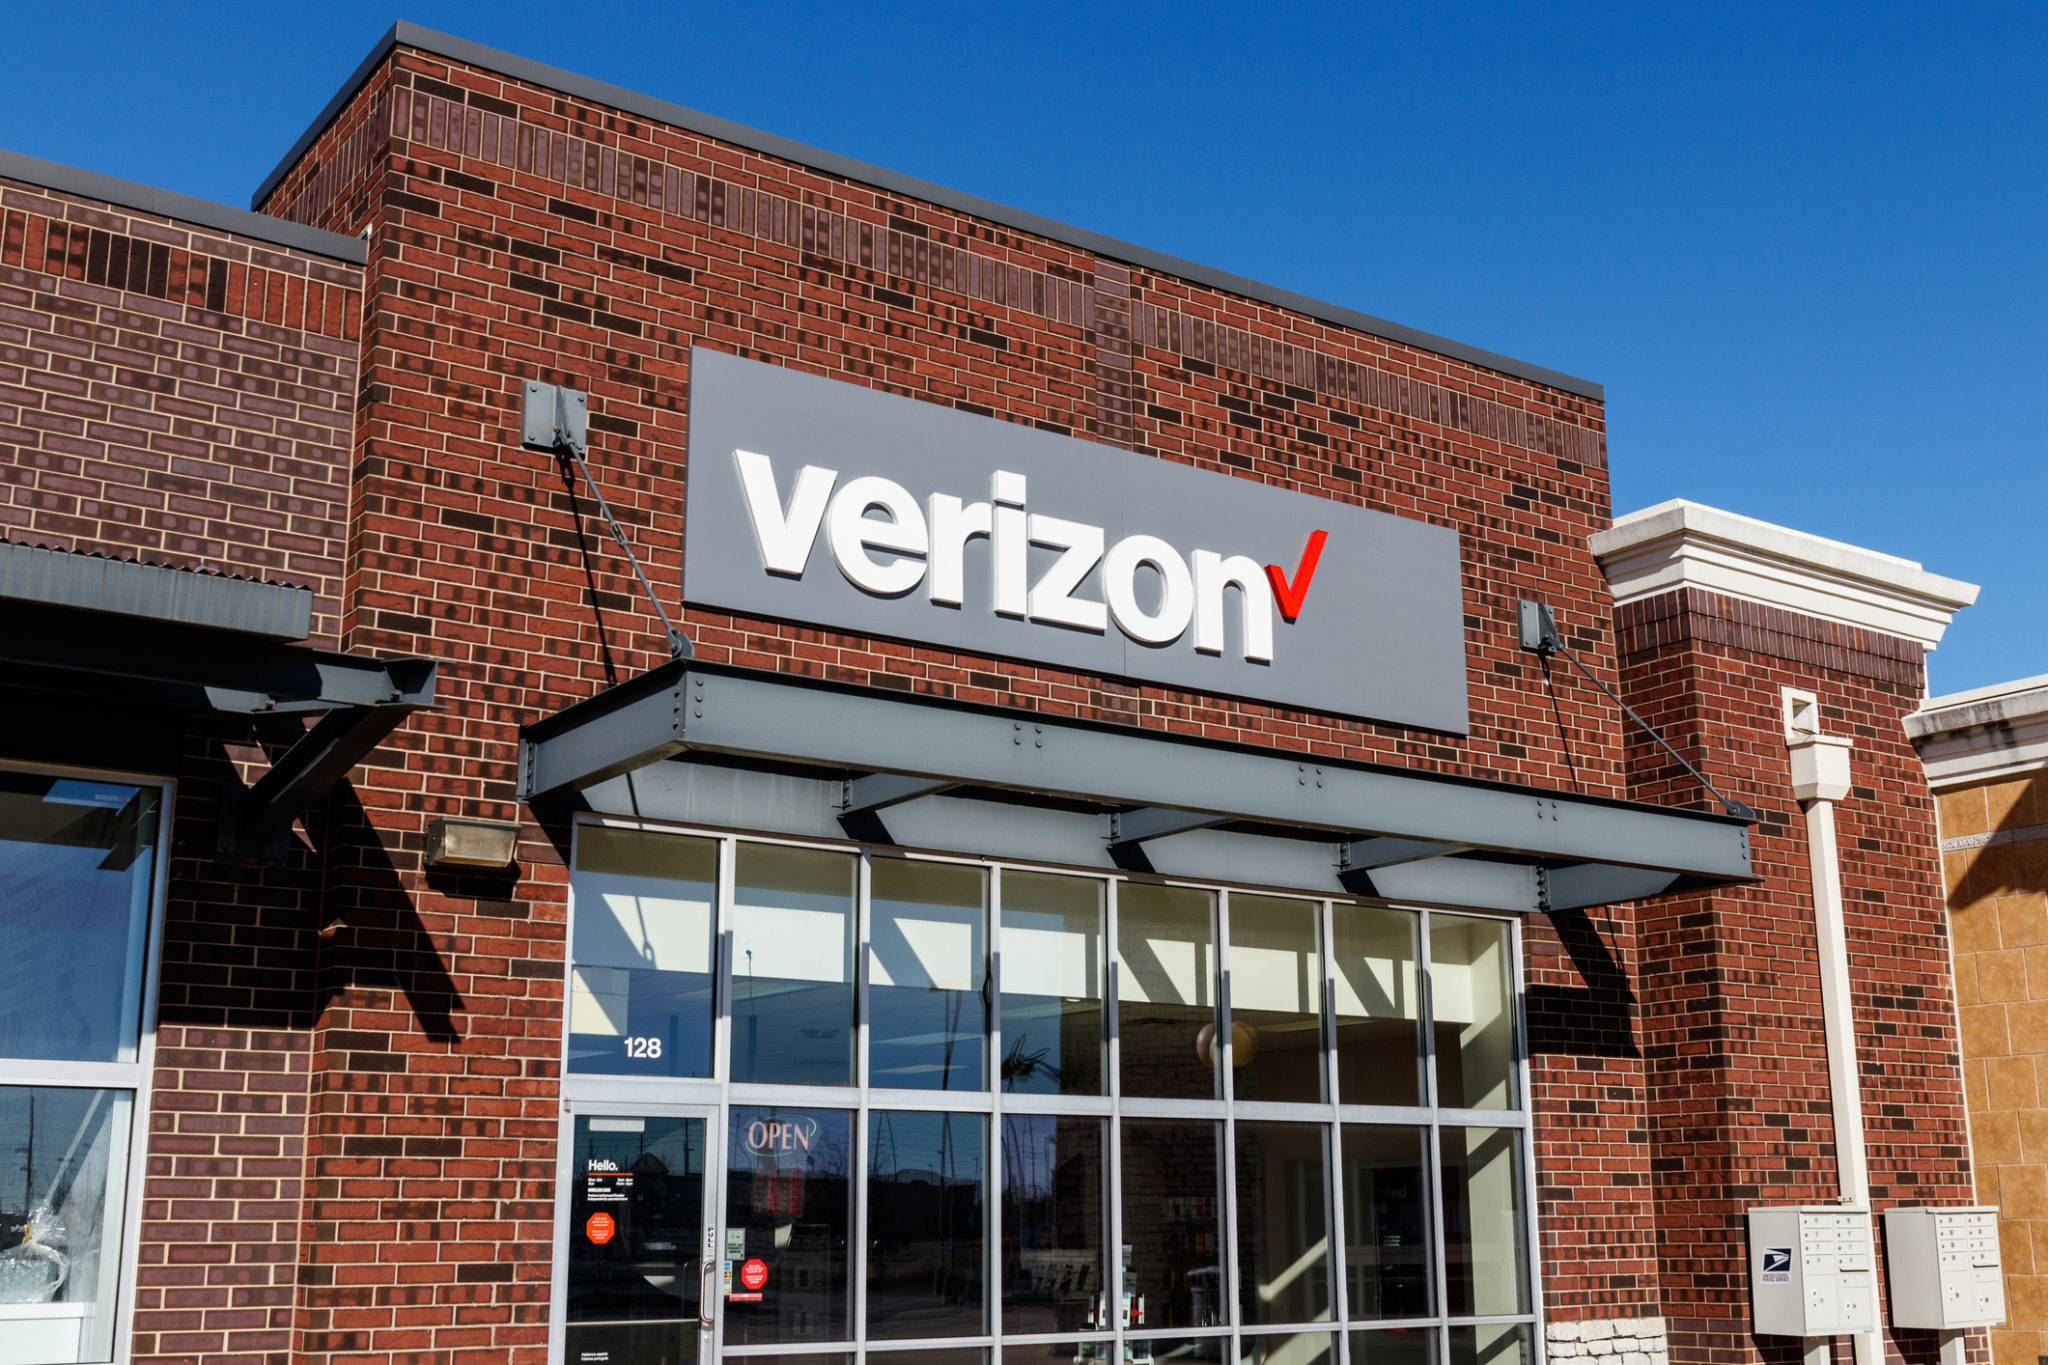 Verizon Fios Lost 67,000 TV Customers in The 3rd Quarter of 2019